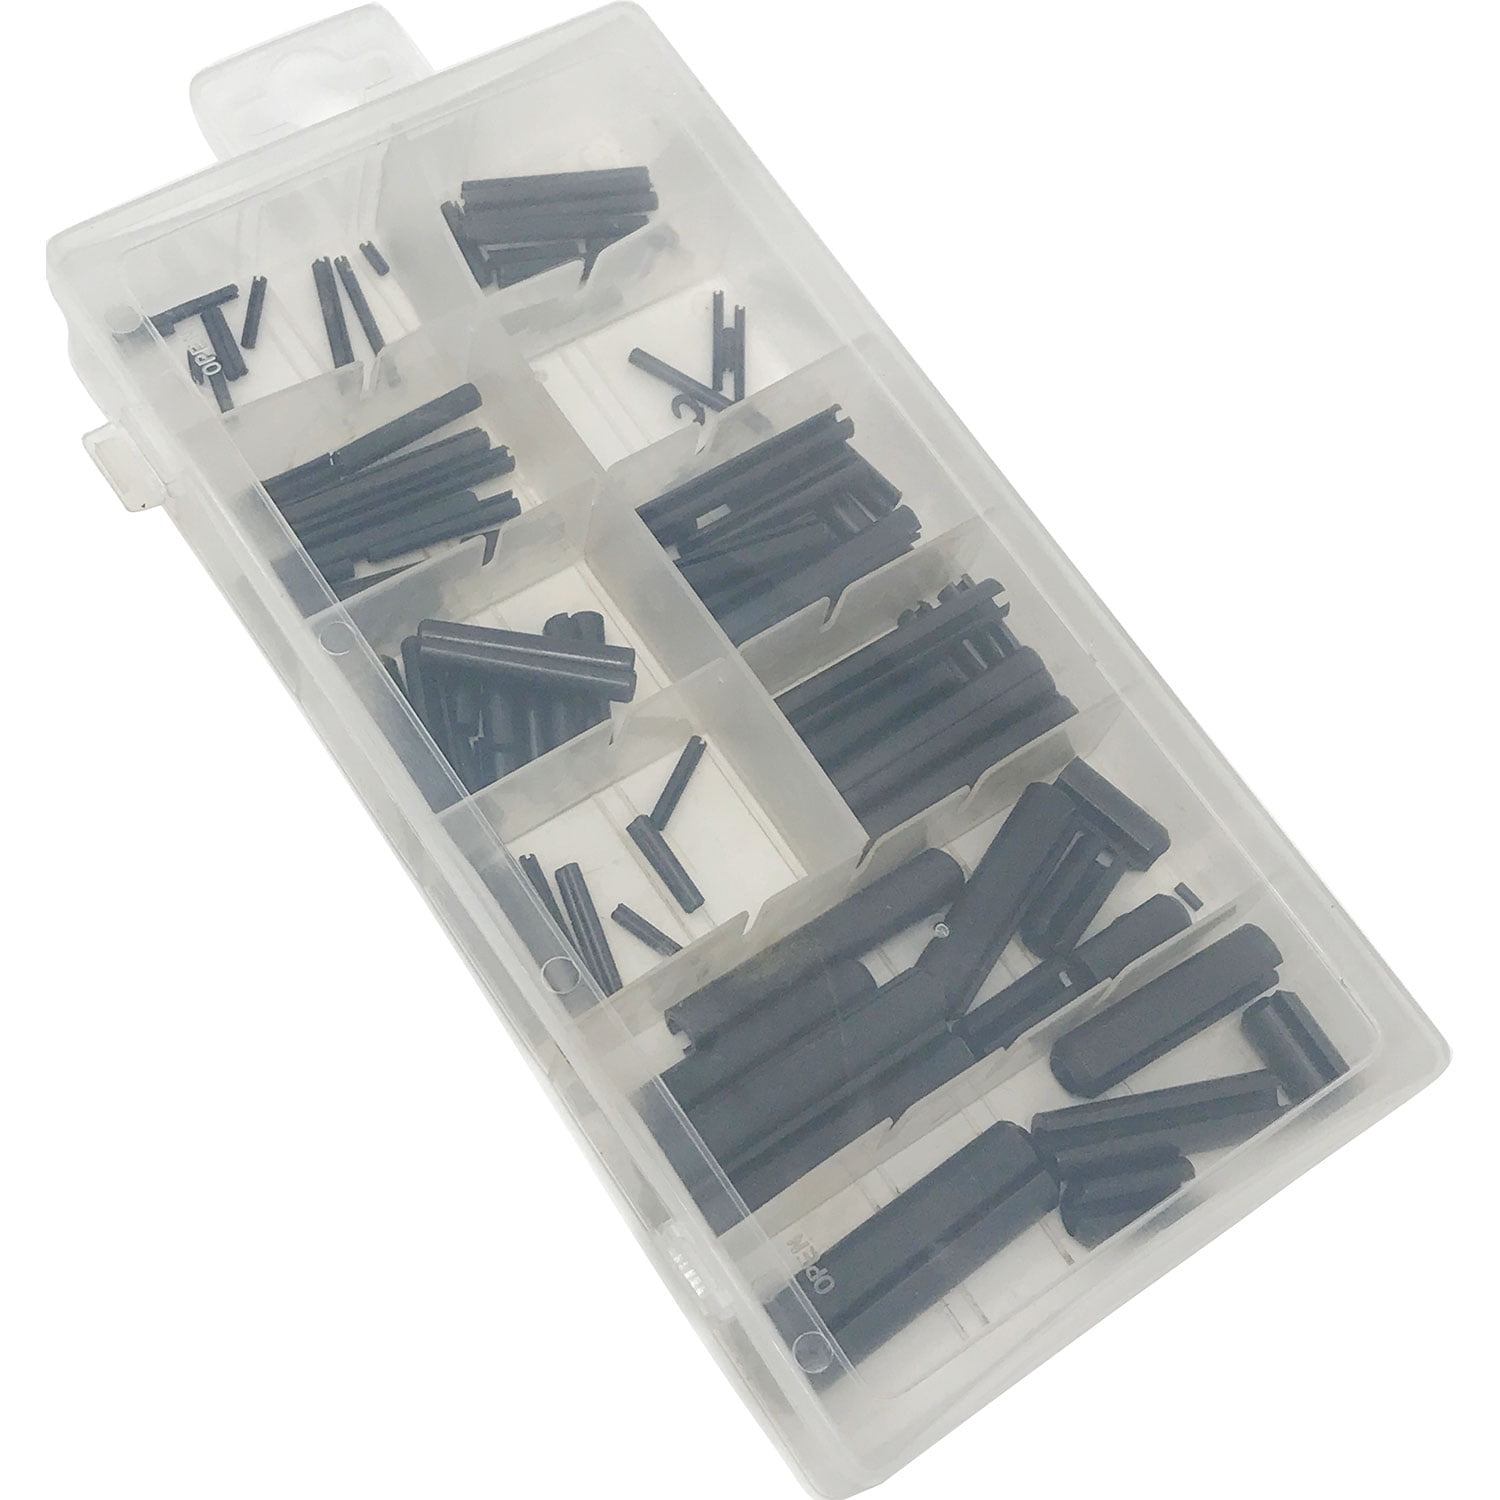 120pc SAE INCH ROLL PIN SLOTTED DOWEL VARIETY ASSORTMENT KIT 4 for $6.96 each! 